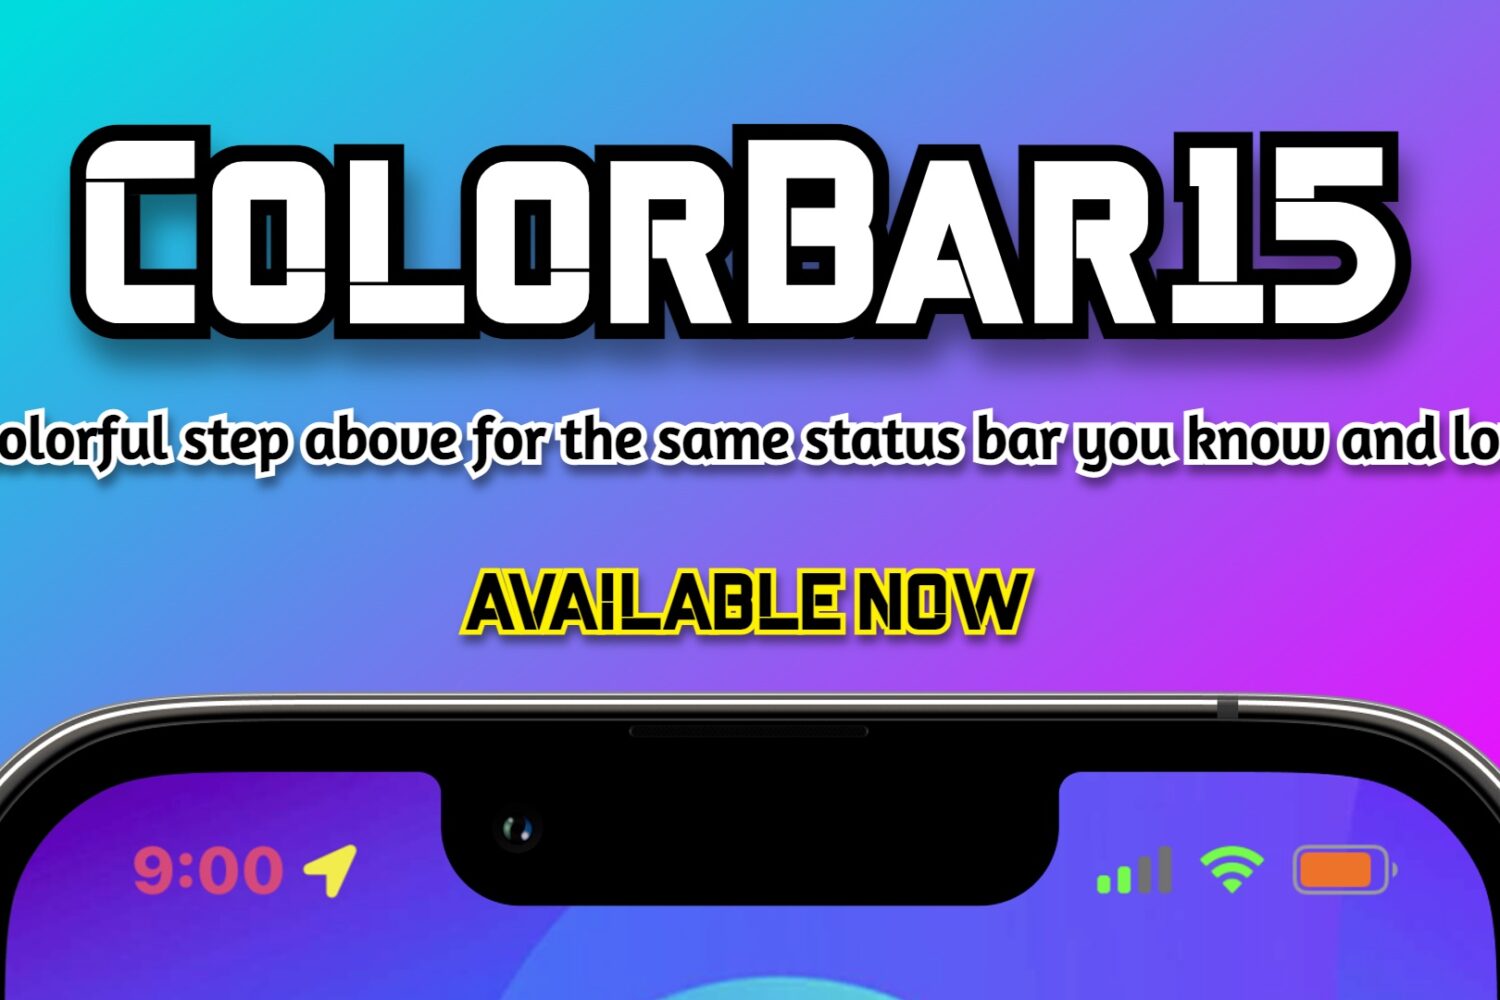 Colorize your jailbroken iOS 15 device’s Status Bar with ColorBar15.